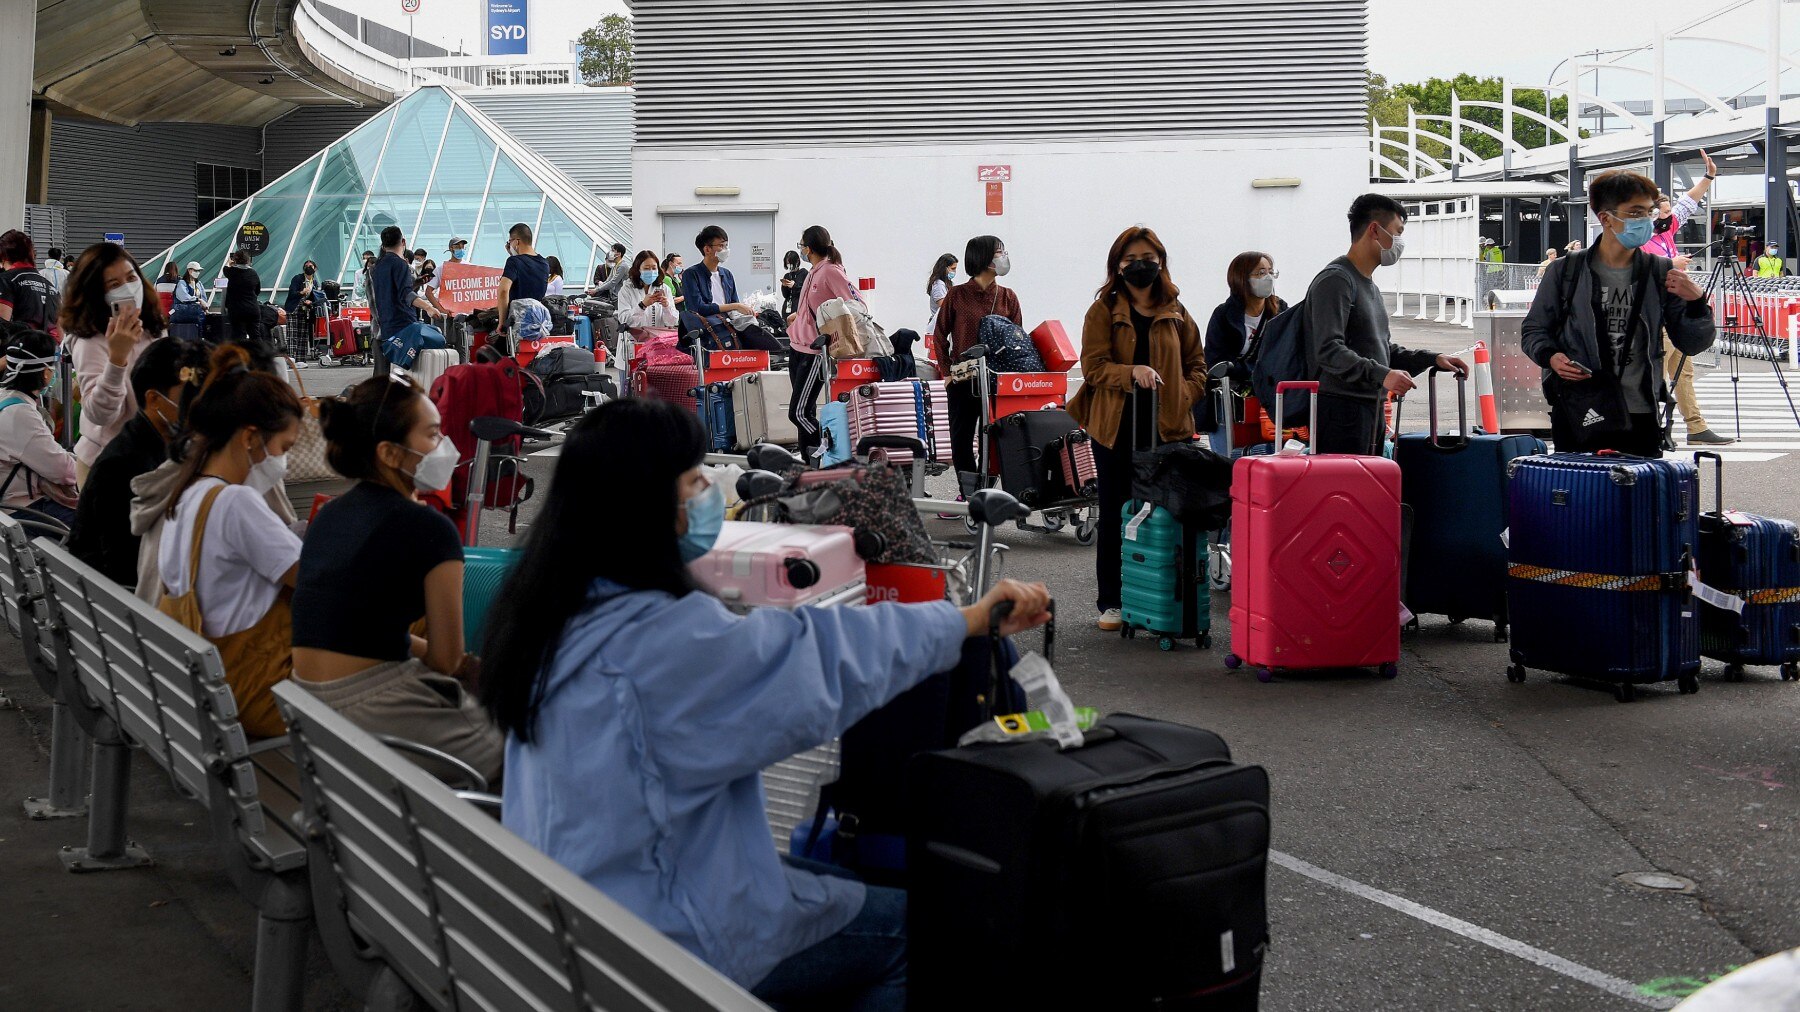 International students line up for coaches after arriving at Sydney Airport in Sydney, Monday, December 6, 2021.